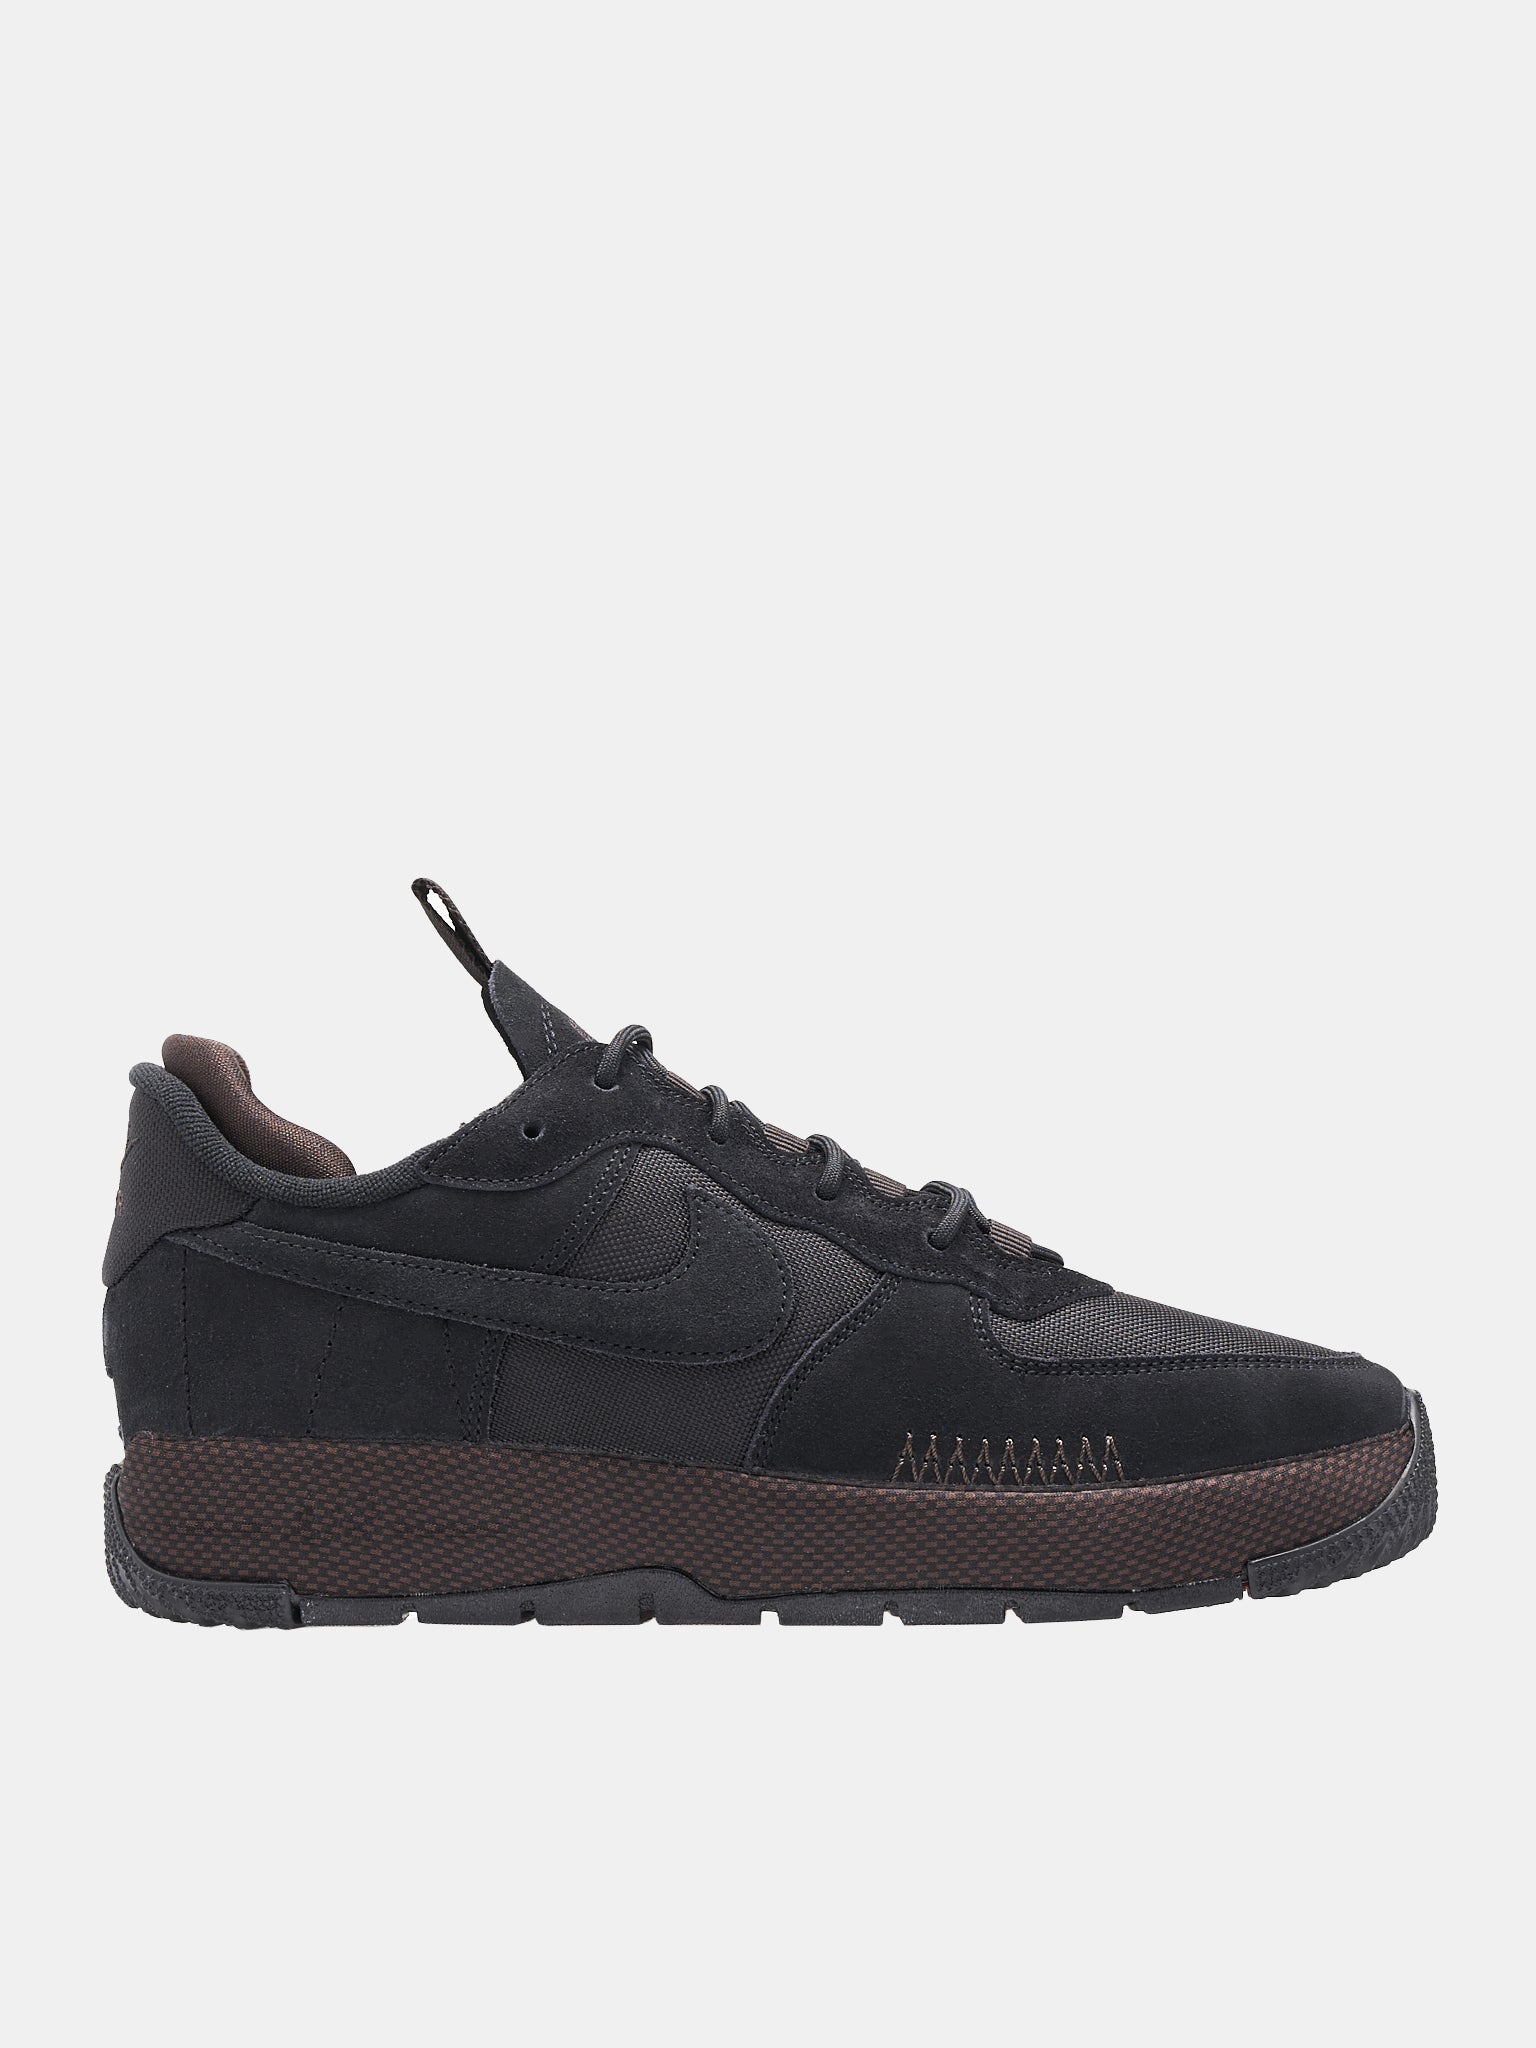 Nike Air Force 1 Low Utility 'Bred' | Black | Men's Size 9.5